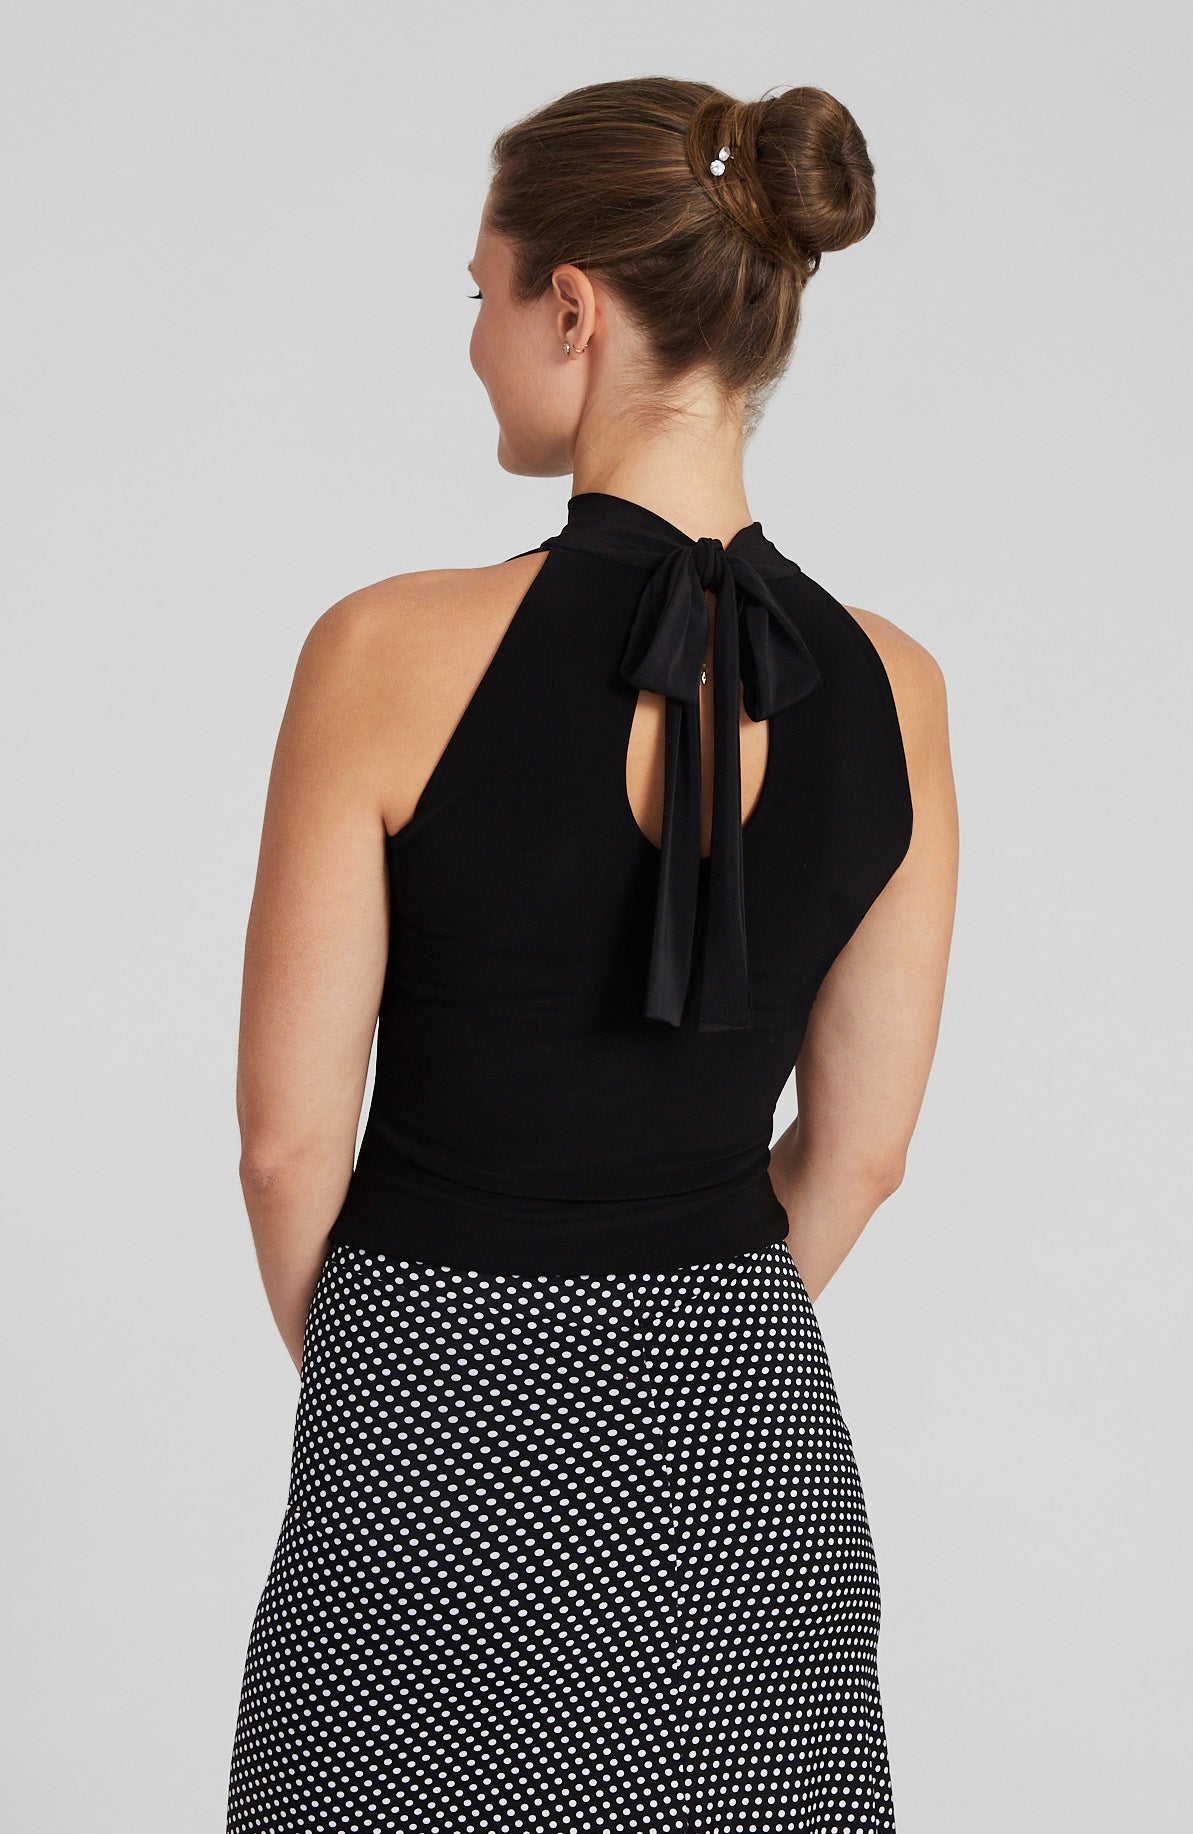 LYNN - Halter Neck Top with Bow in Black